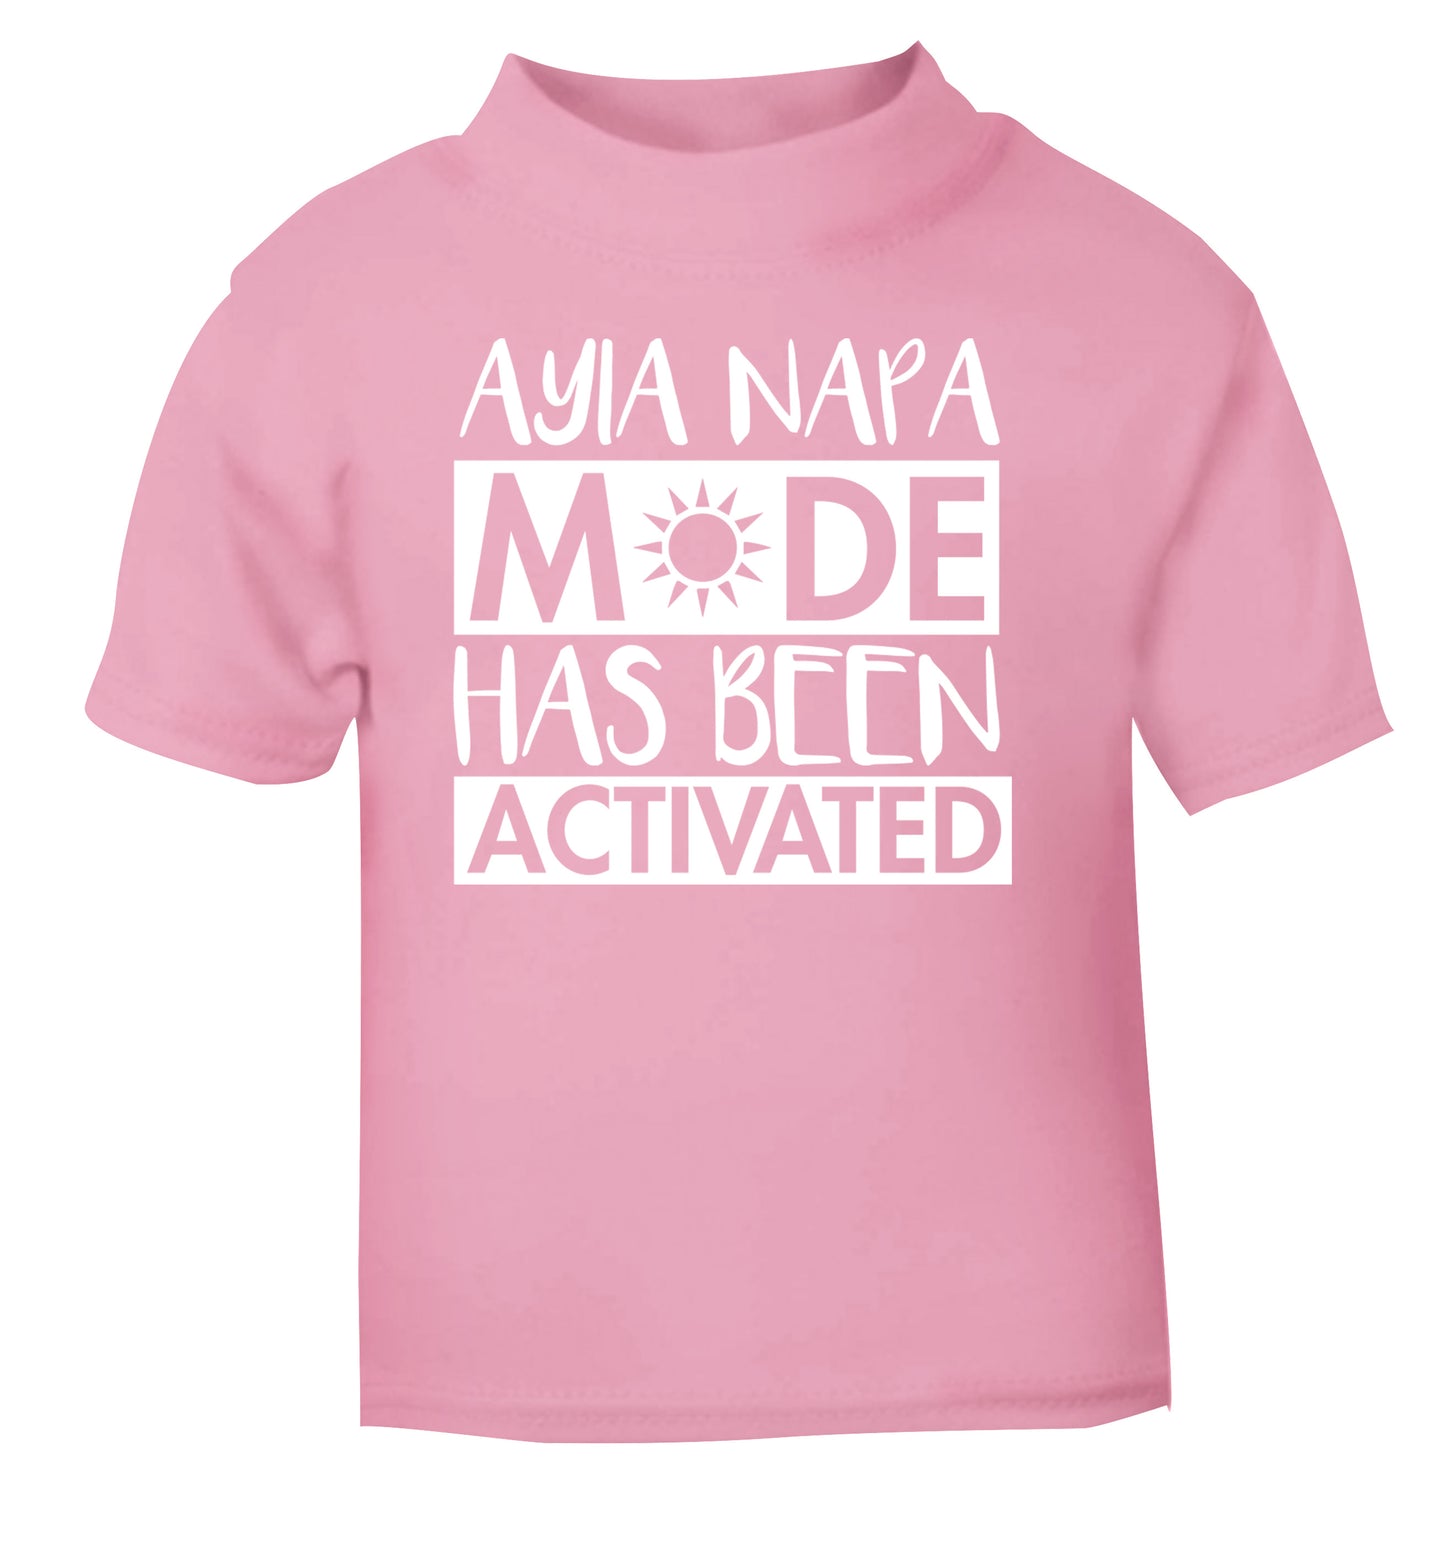 Ayia Napa mode has been activated light pink Baby Toddler Tshirt 2 Years